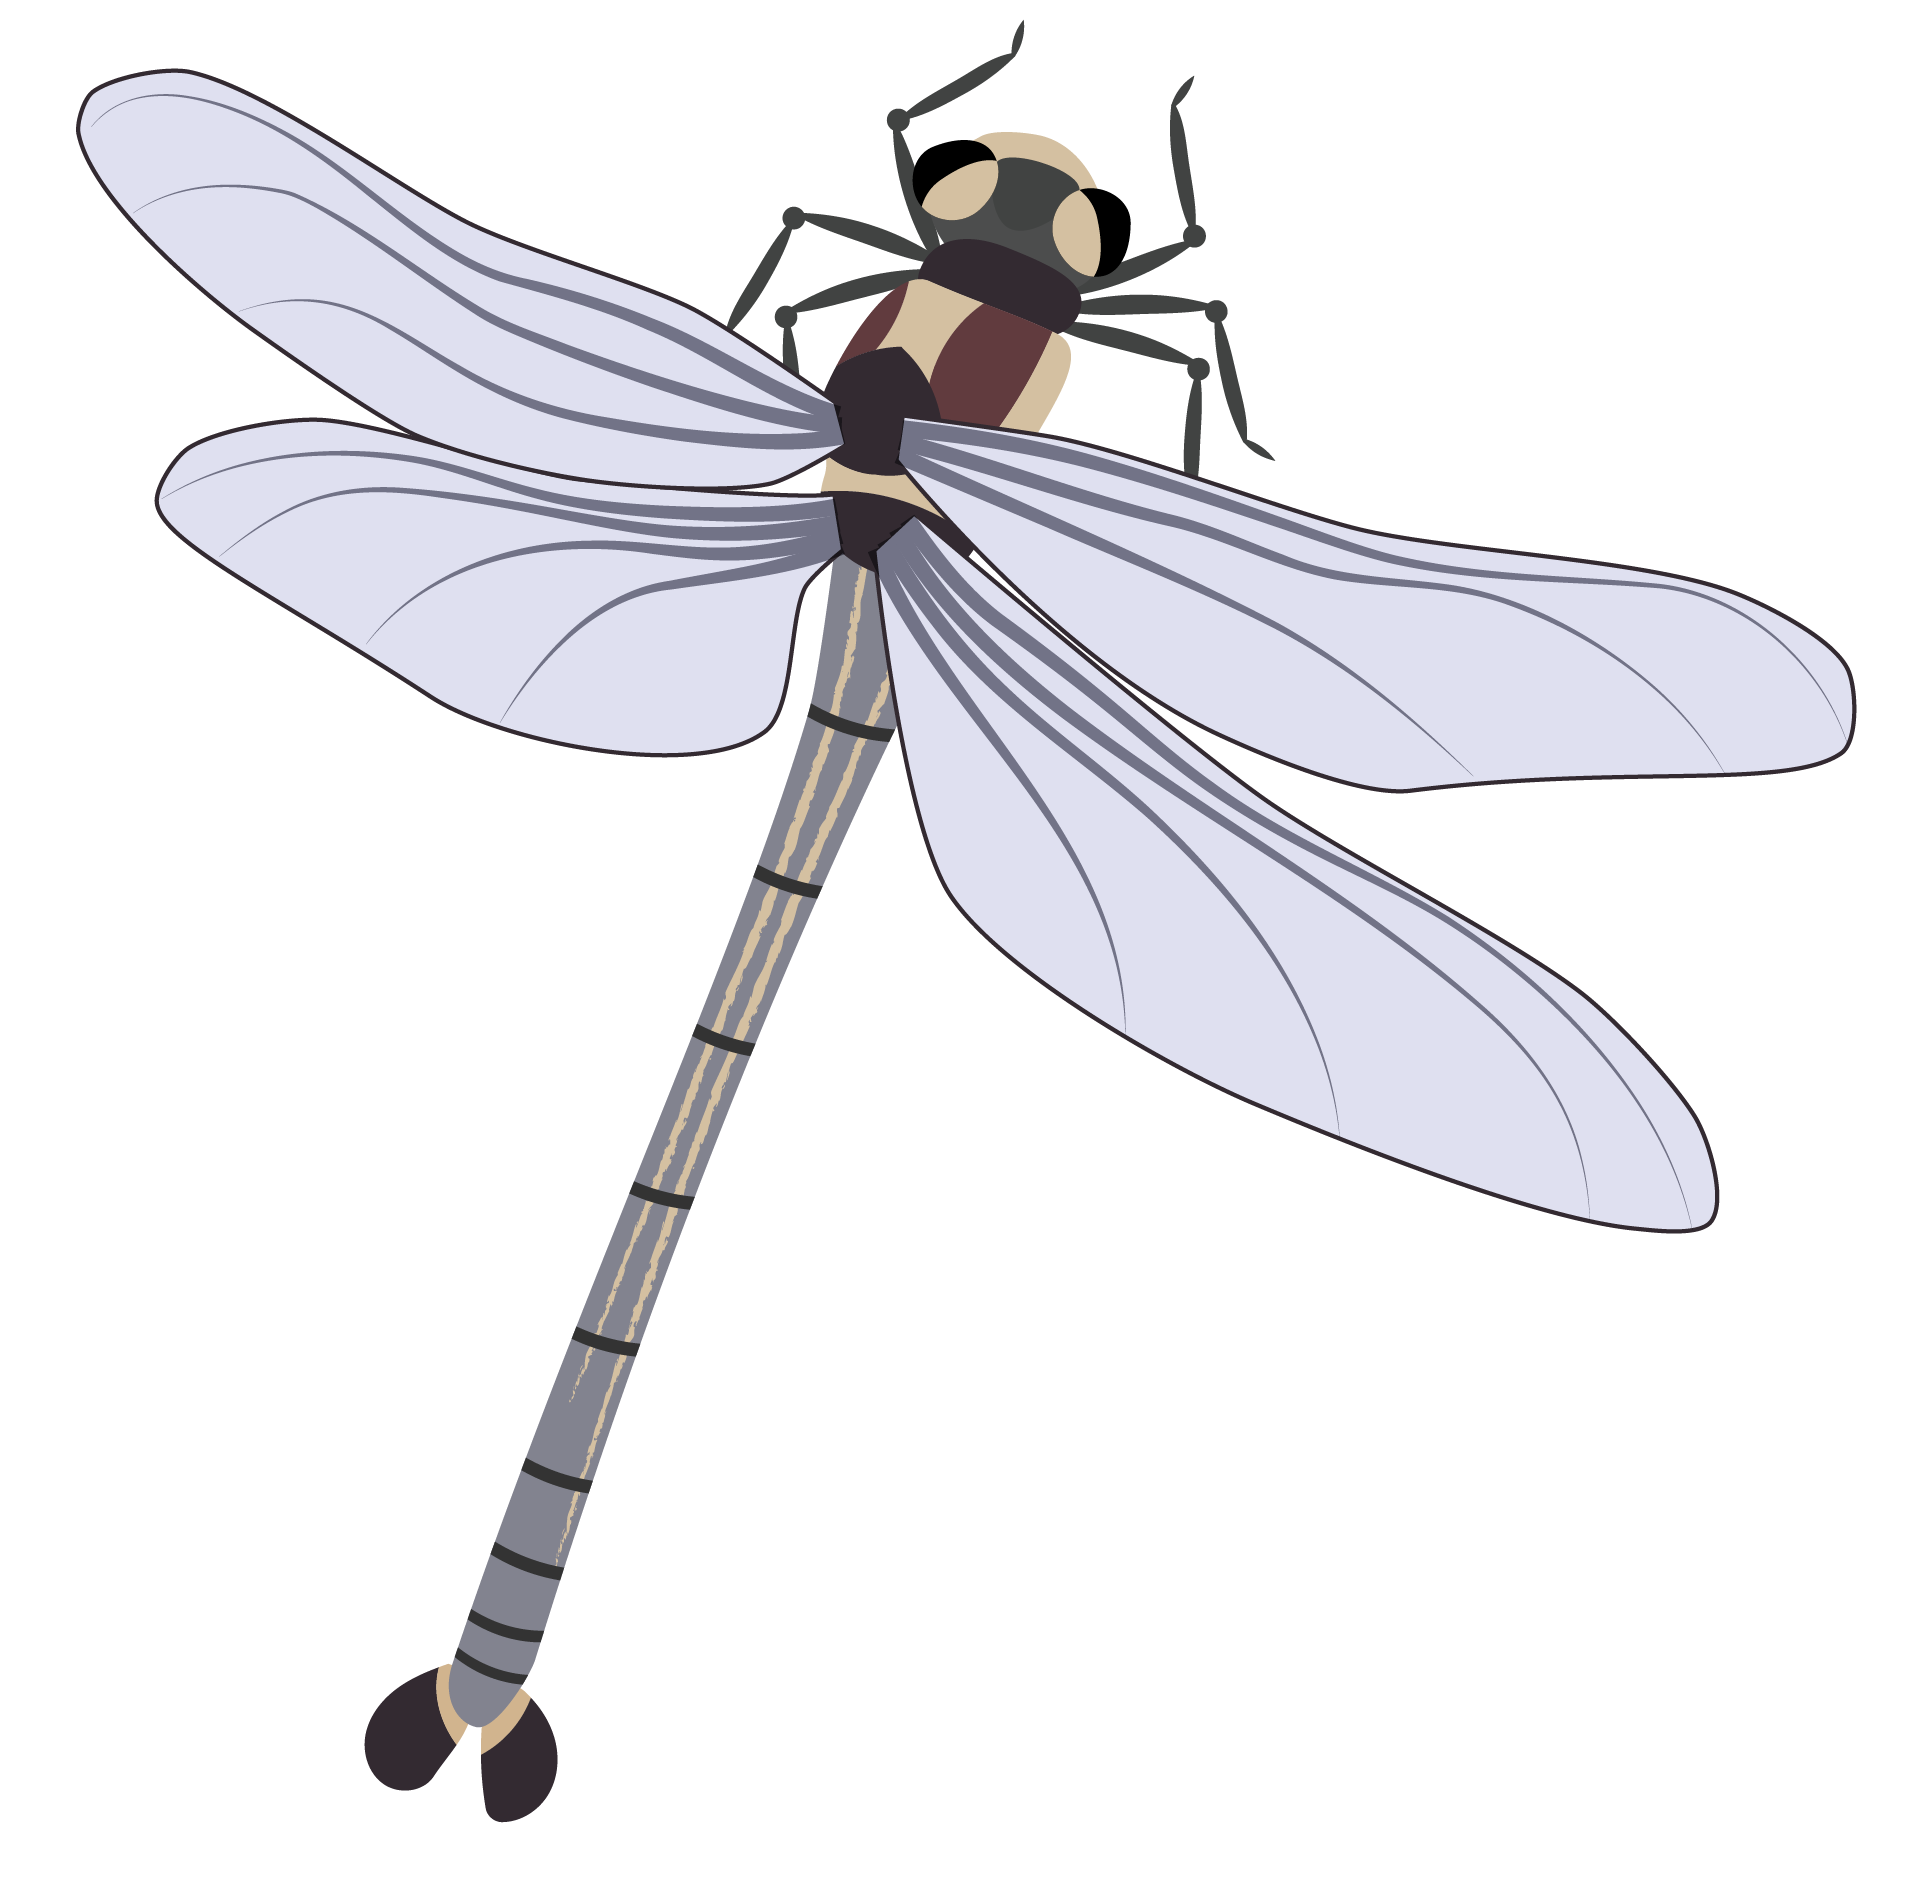 Giant dragonfly